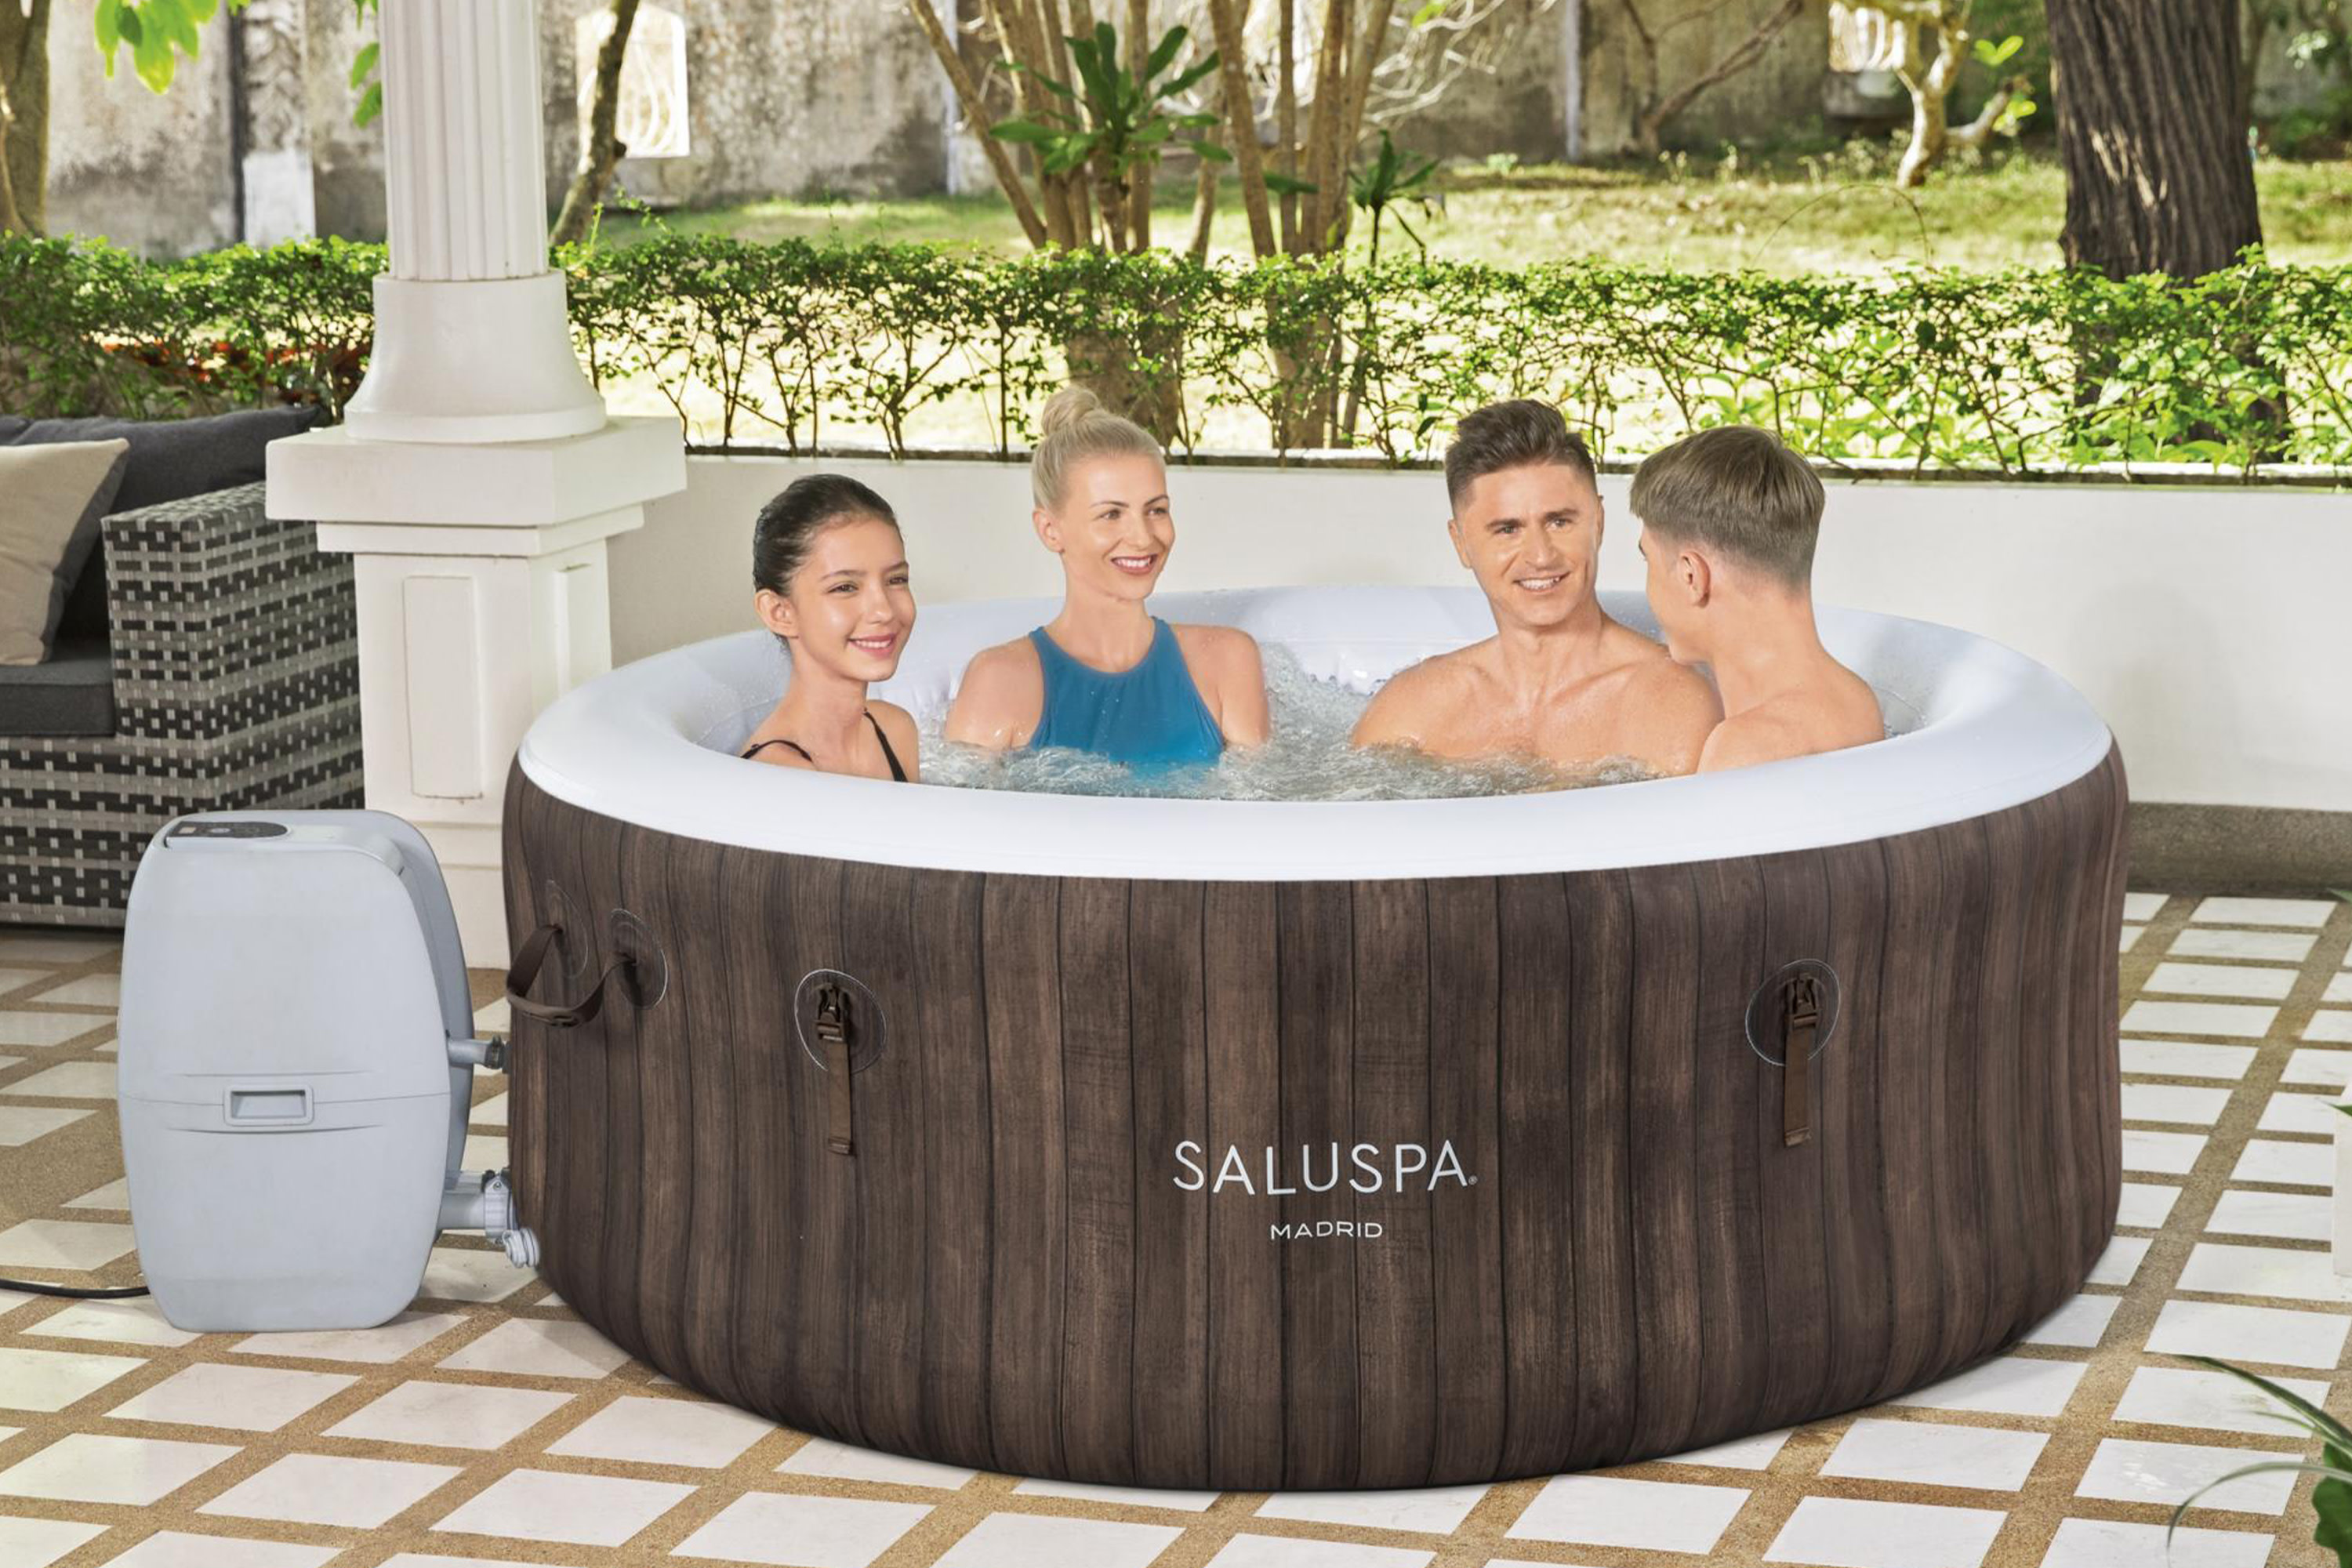 Bestway SaluSpa 71 in. x 26 in. Madrid 177 Gal Inflatable Hot Tub, 104˚F Max Temperature - image 2 of 9